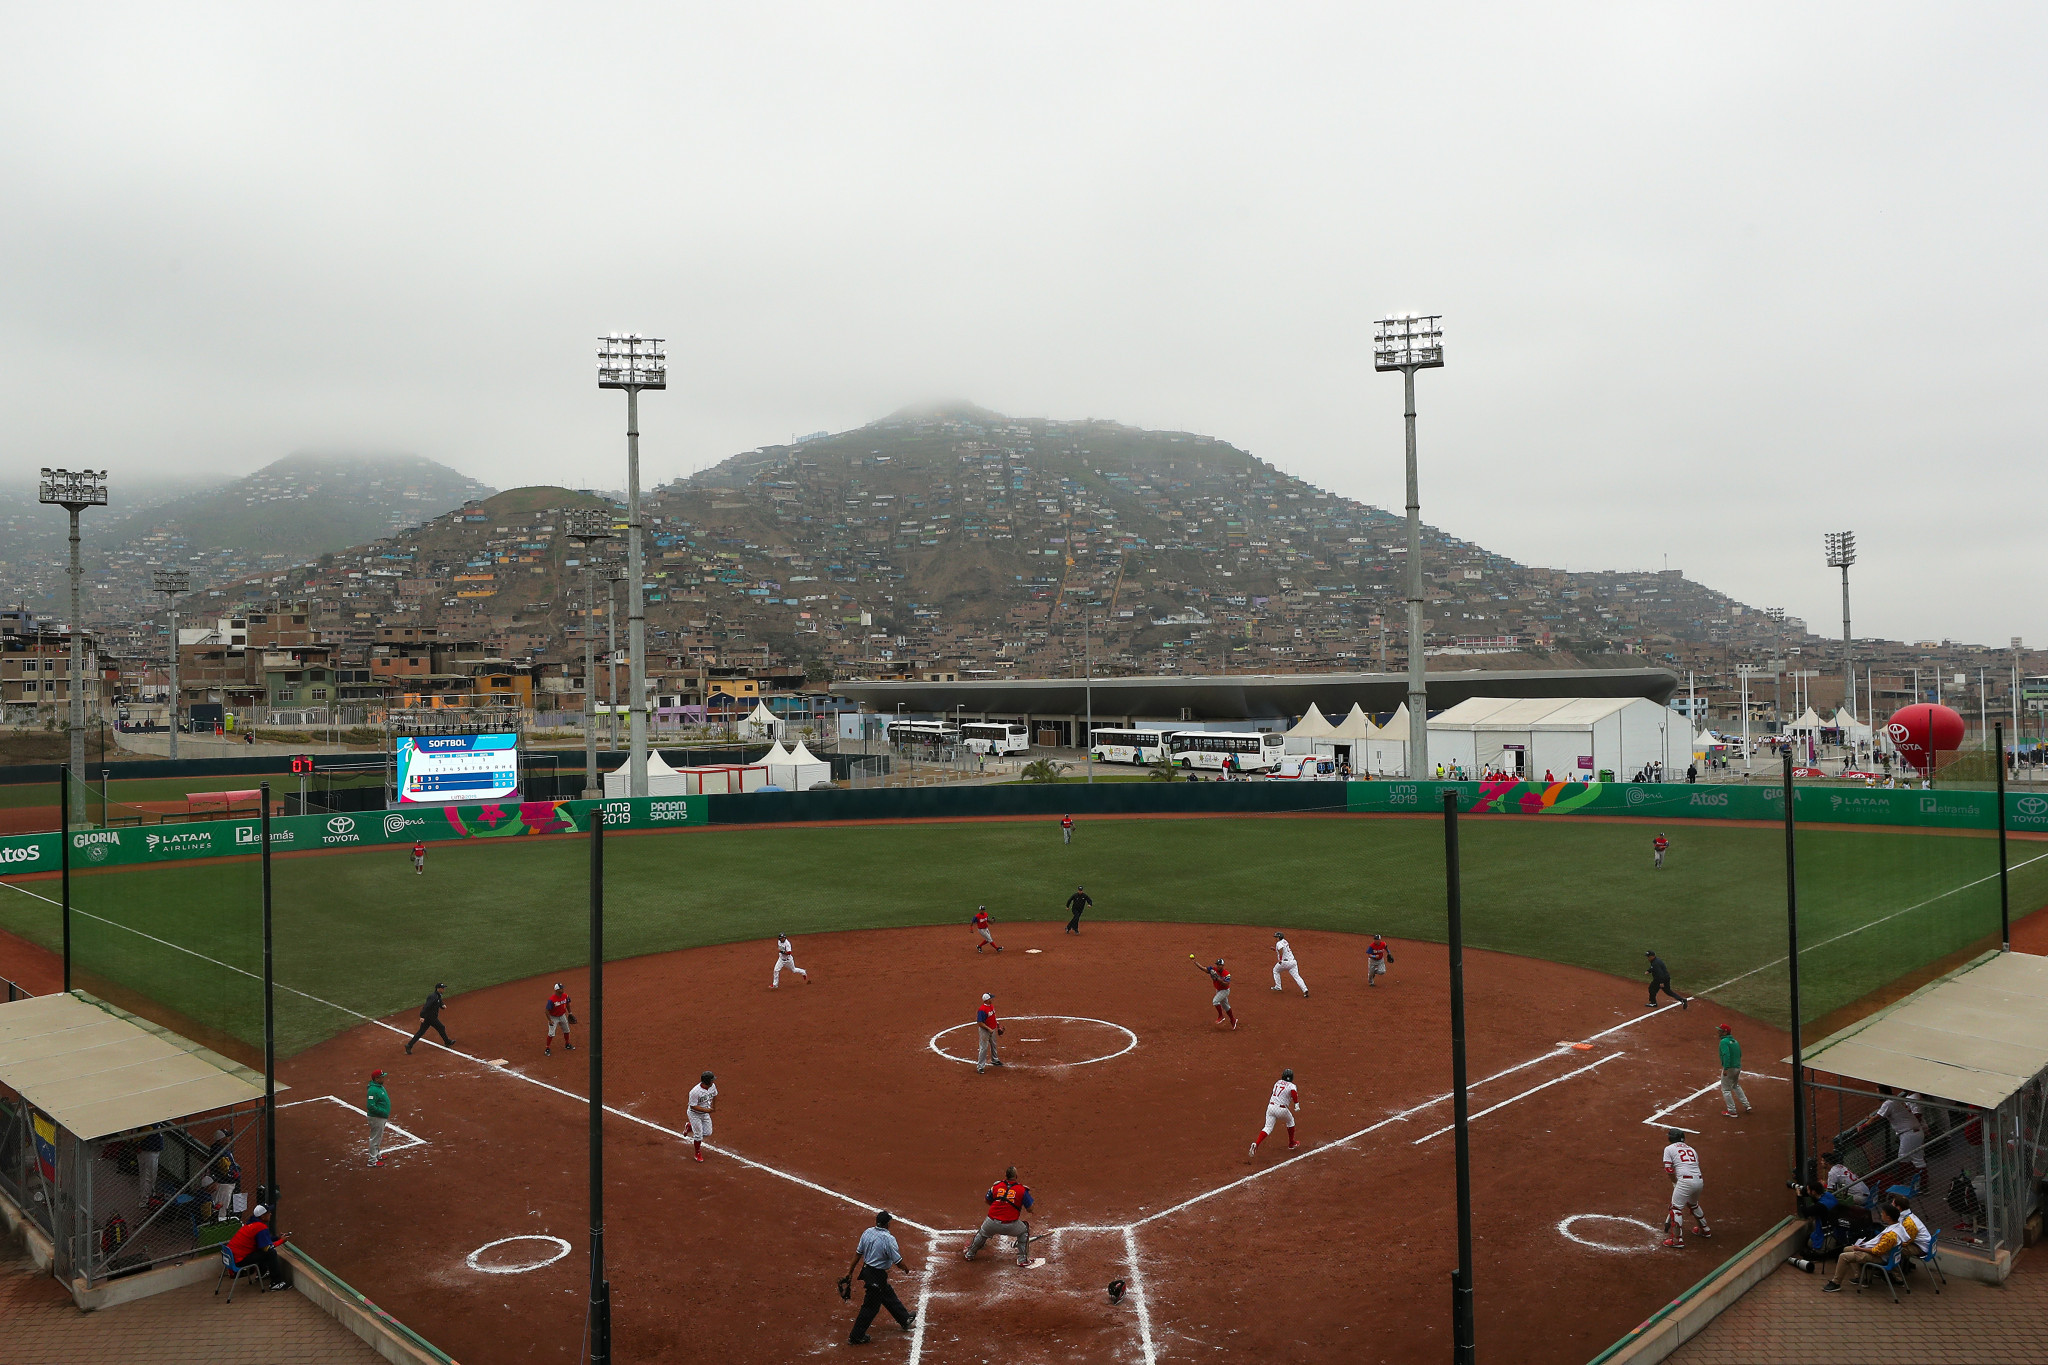 The tournament is due to take place at the softball venue for the Lima 2019 Pan American Games ©Getty Images